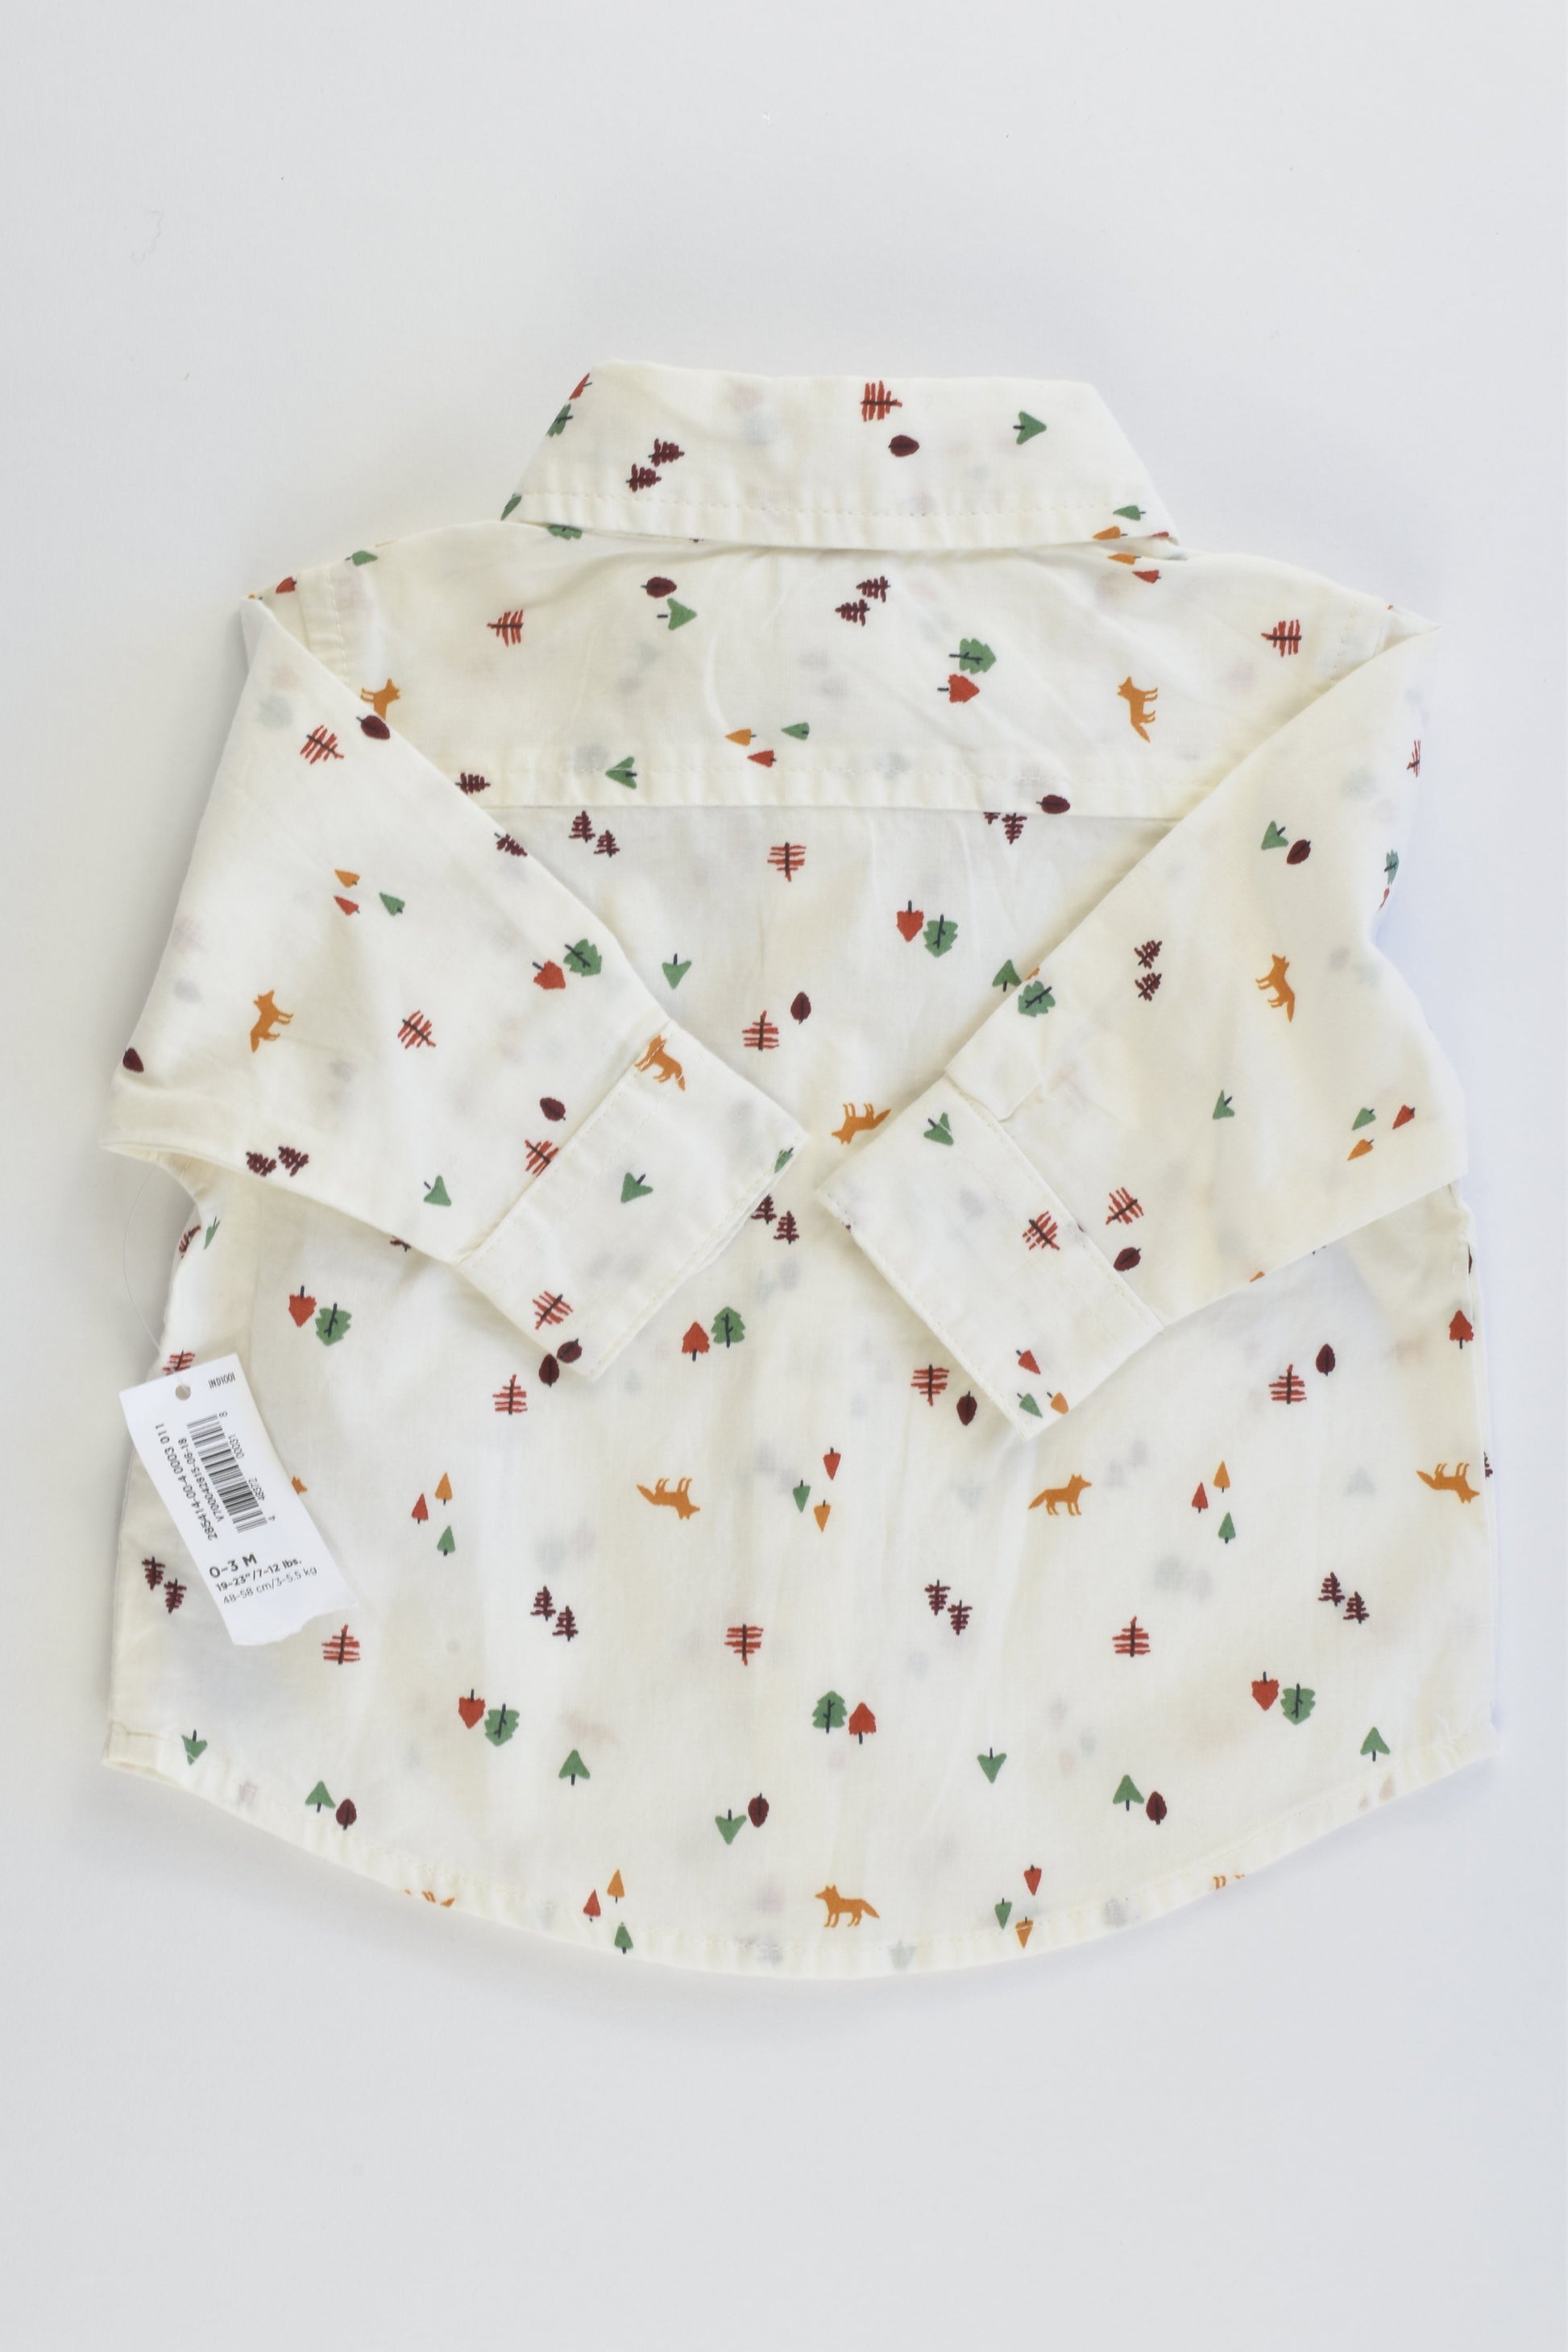 NEW Old Navy Size 000 (0-3 months) Foxes and Trees Collared Shirt with Bow